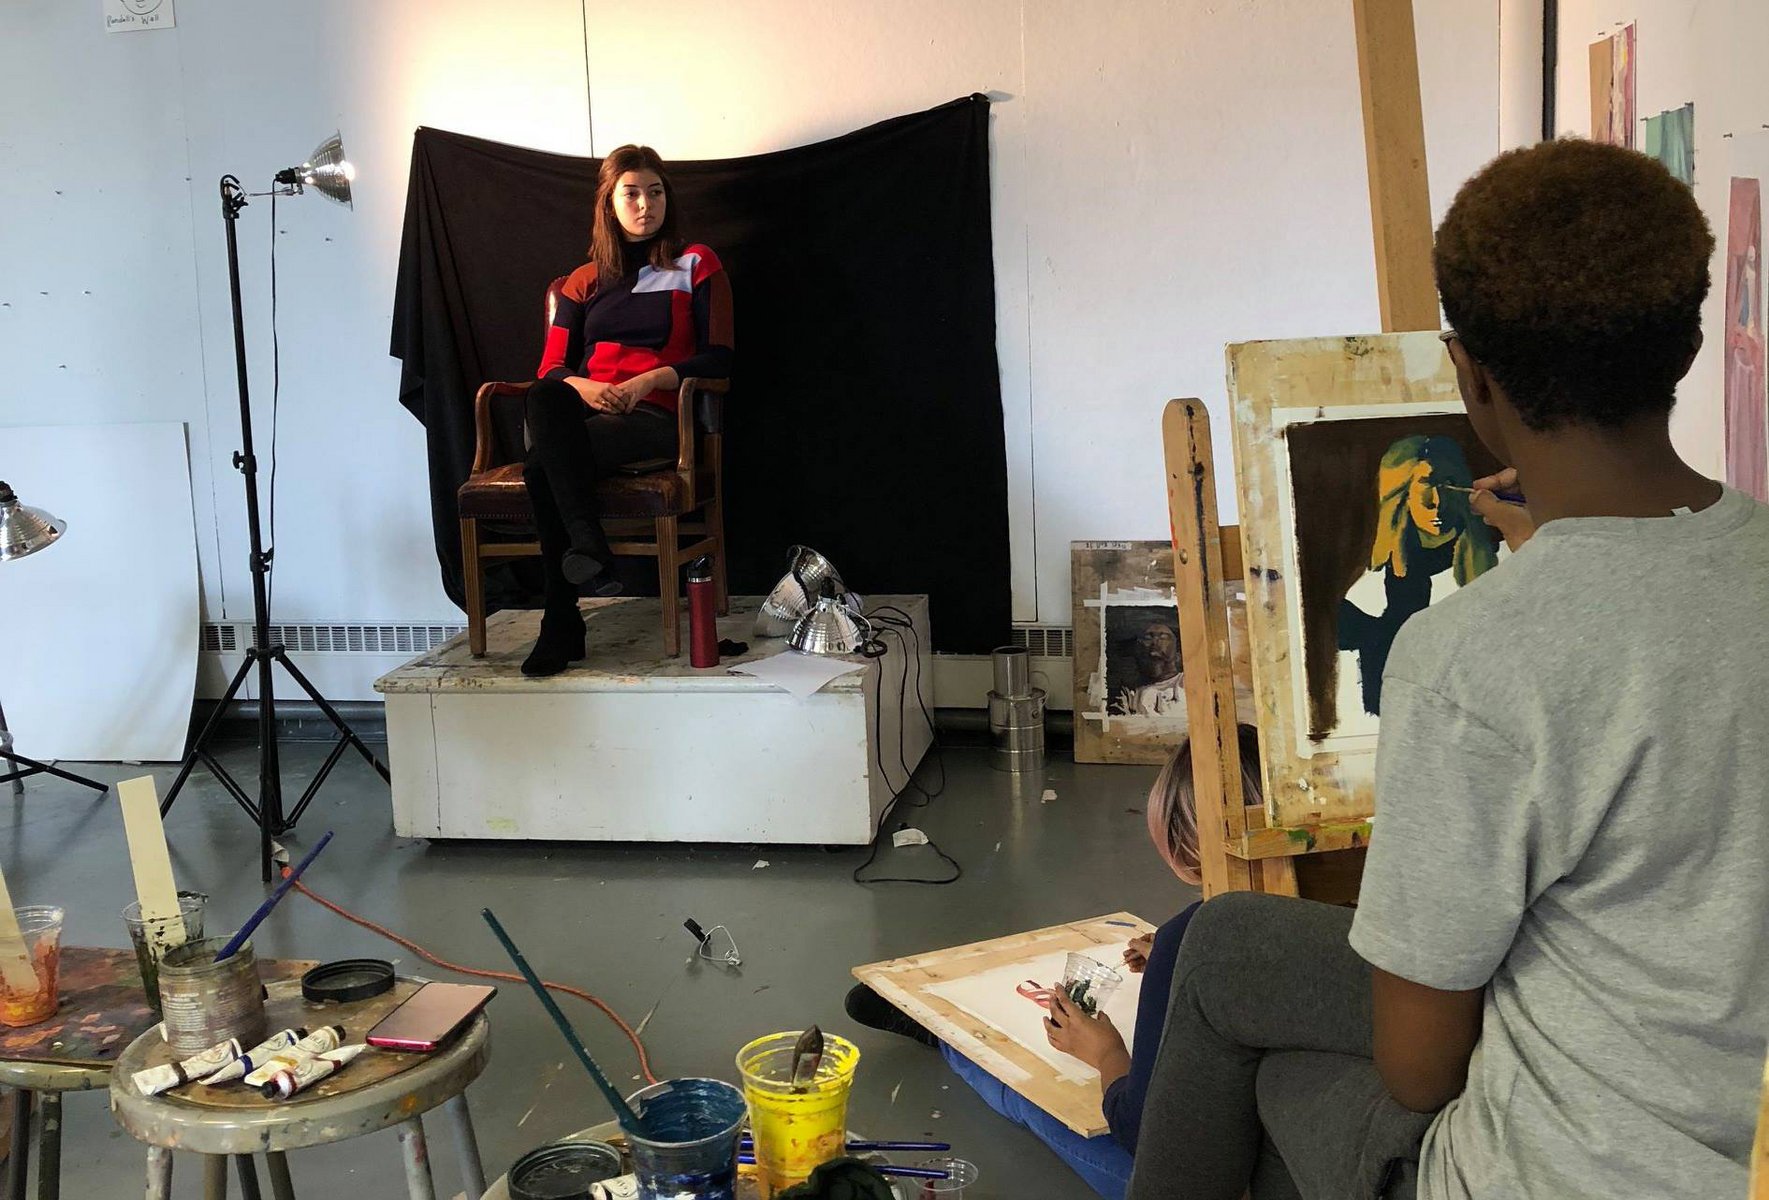 Model posing for Painting class in Beardsley Hall painting studio.